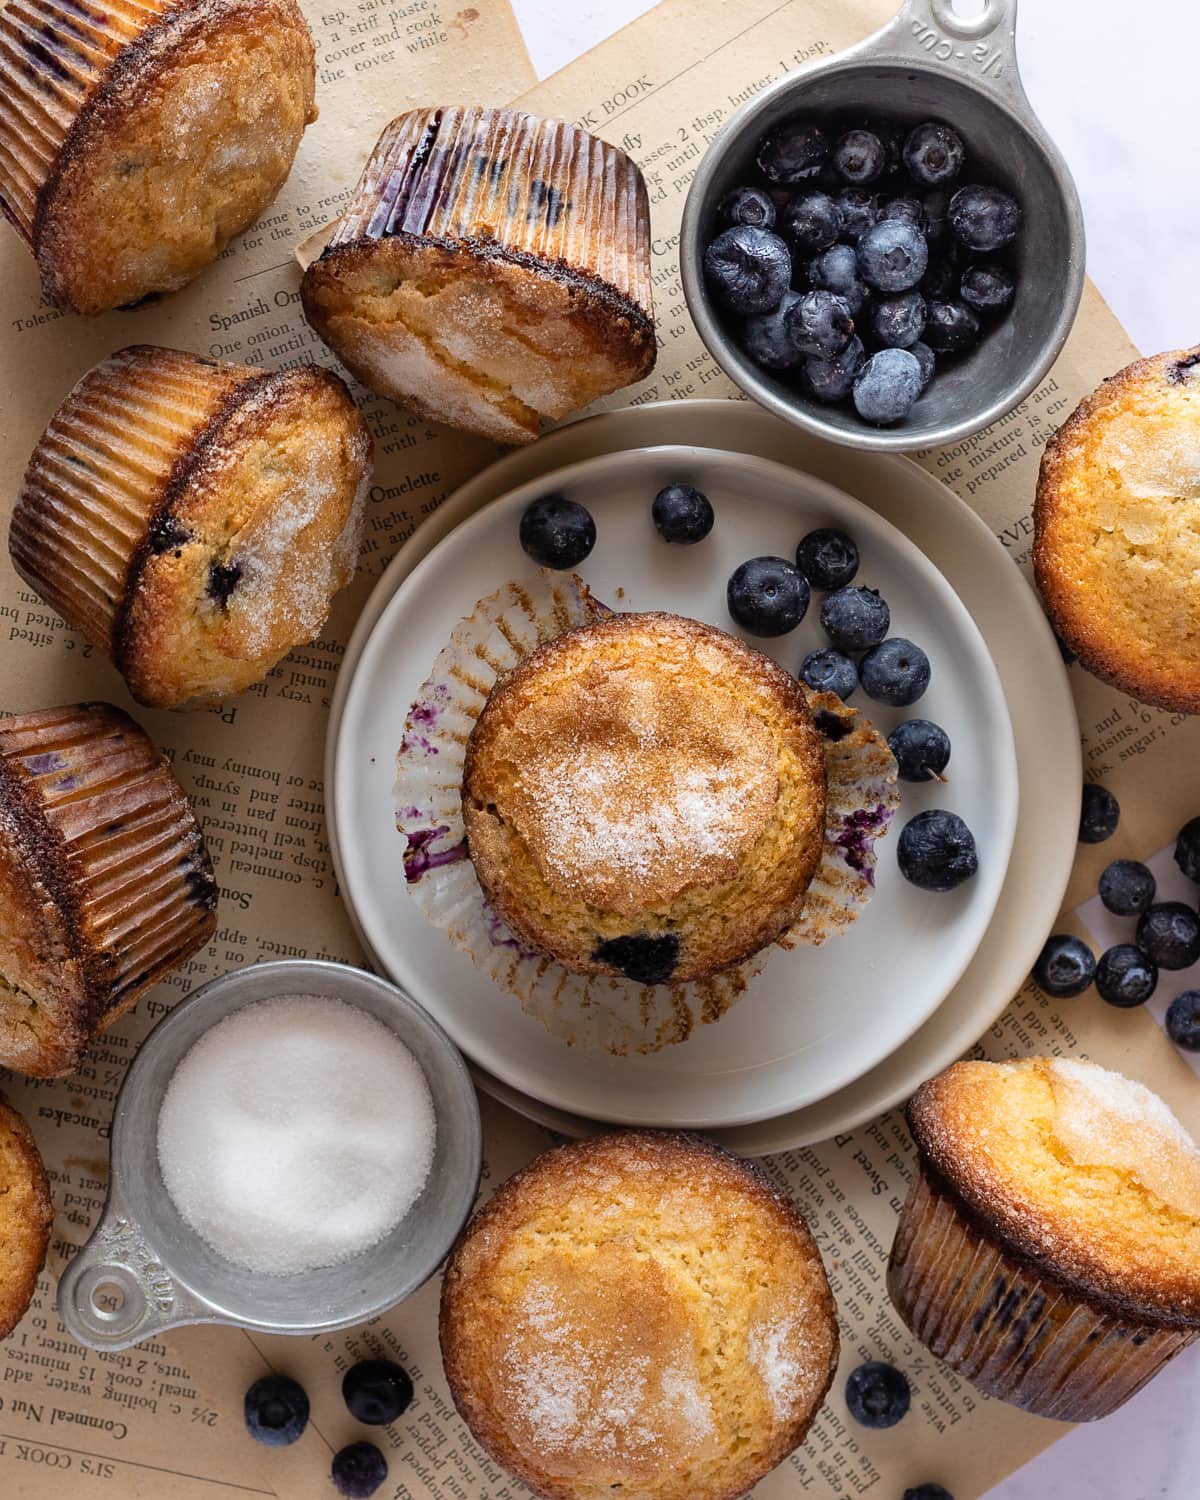 Blueberry muffin with muffin liner peeled off on top of a plate over a few pages of books surrounded by a cup of blueberries, sugar and blueberry muffins.